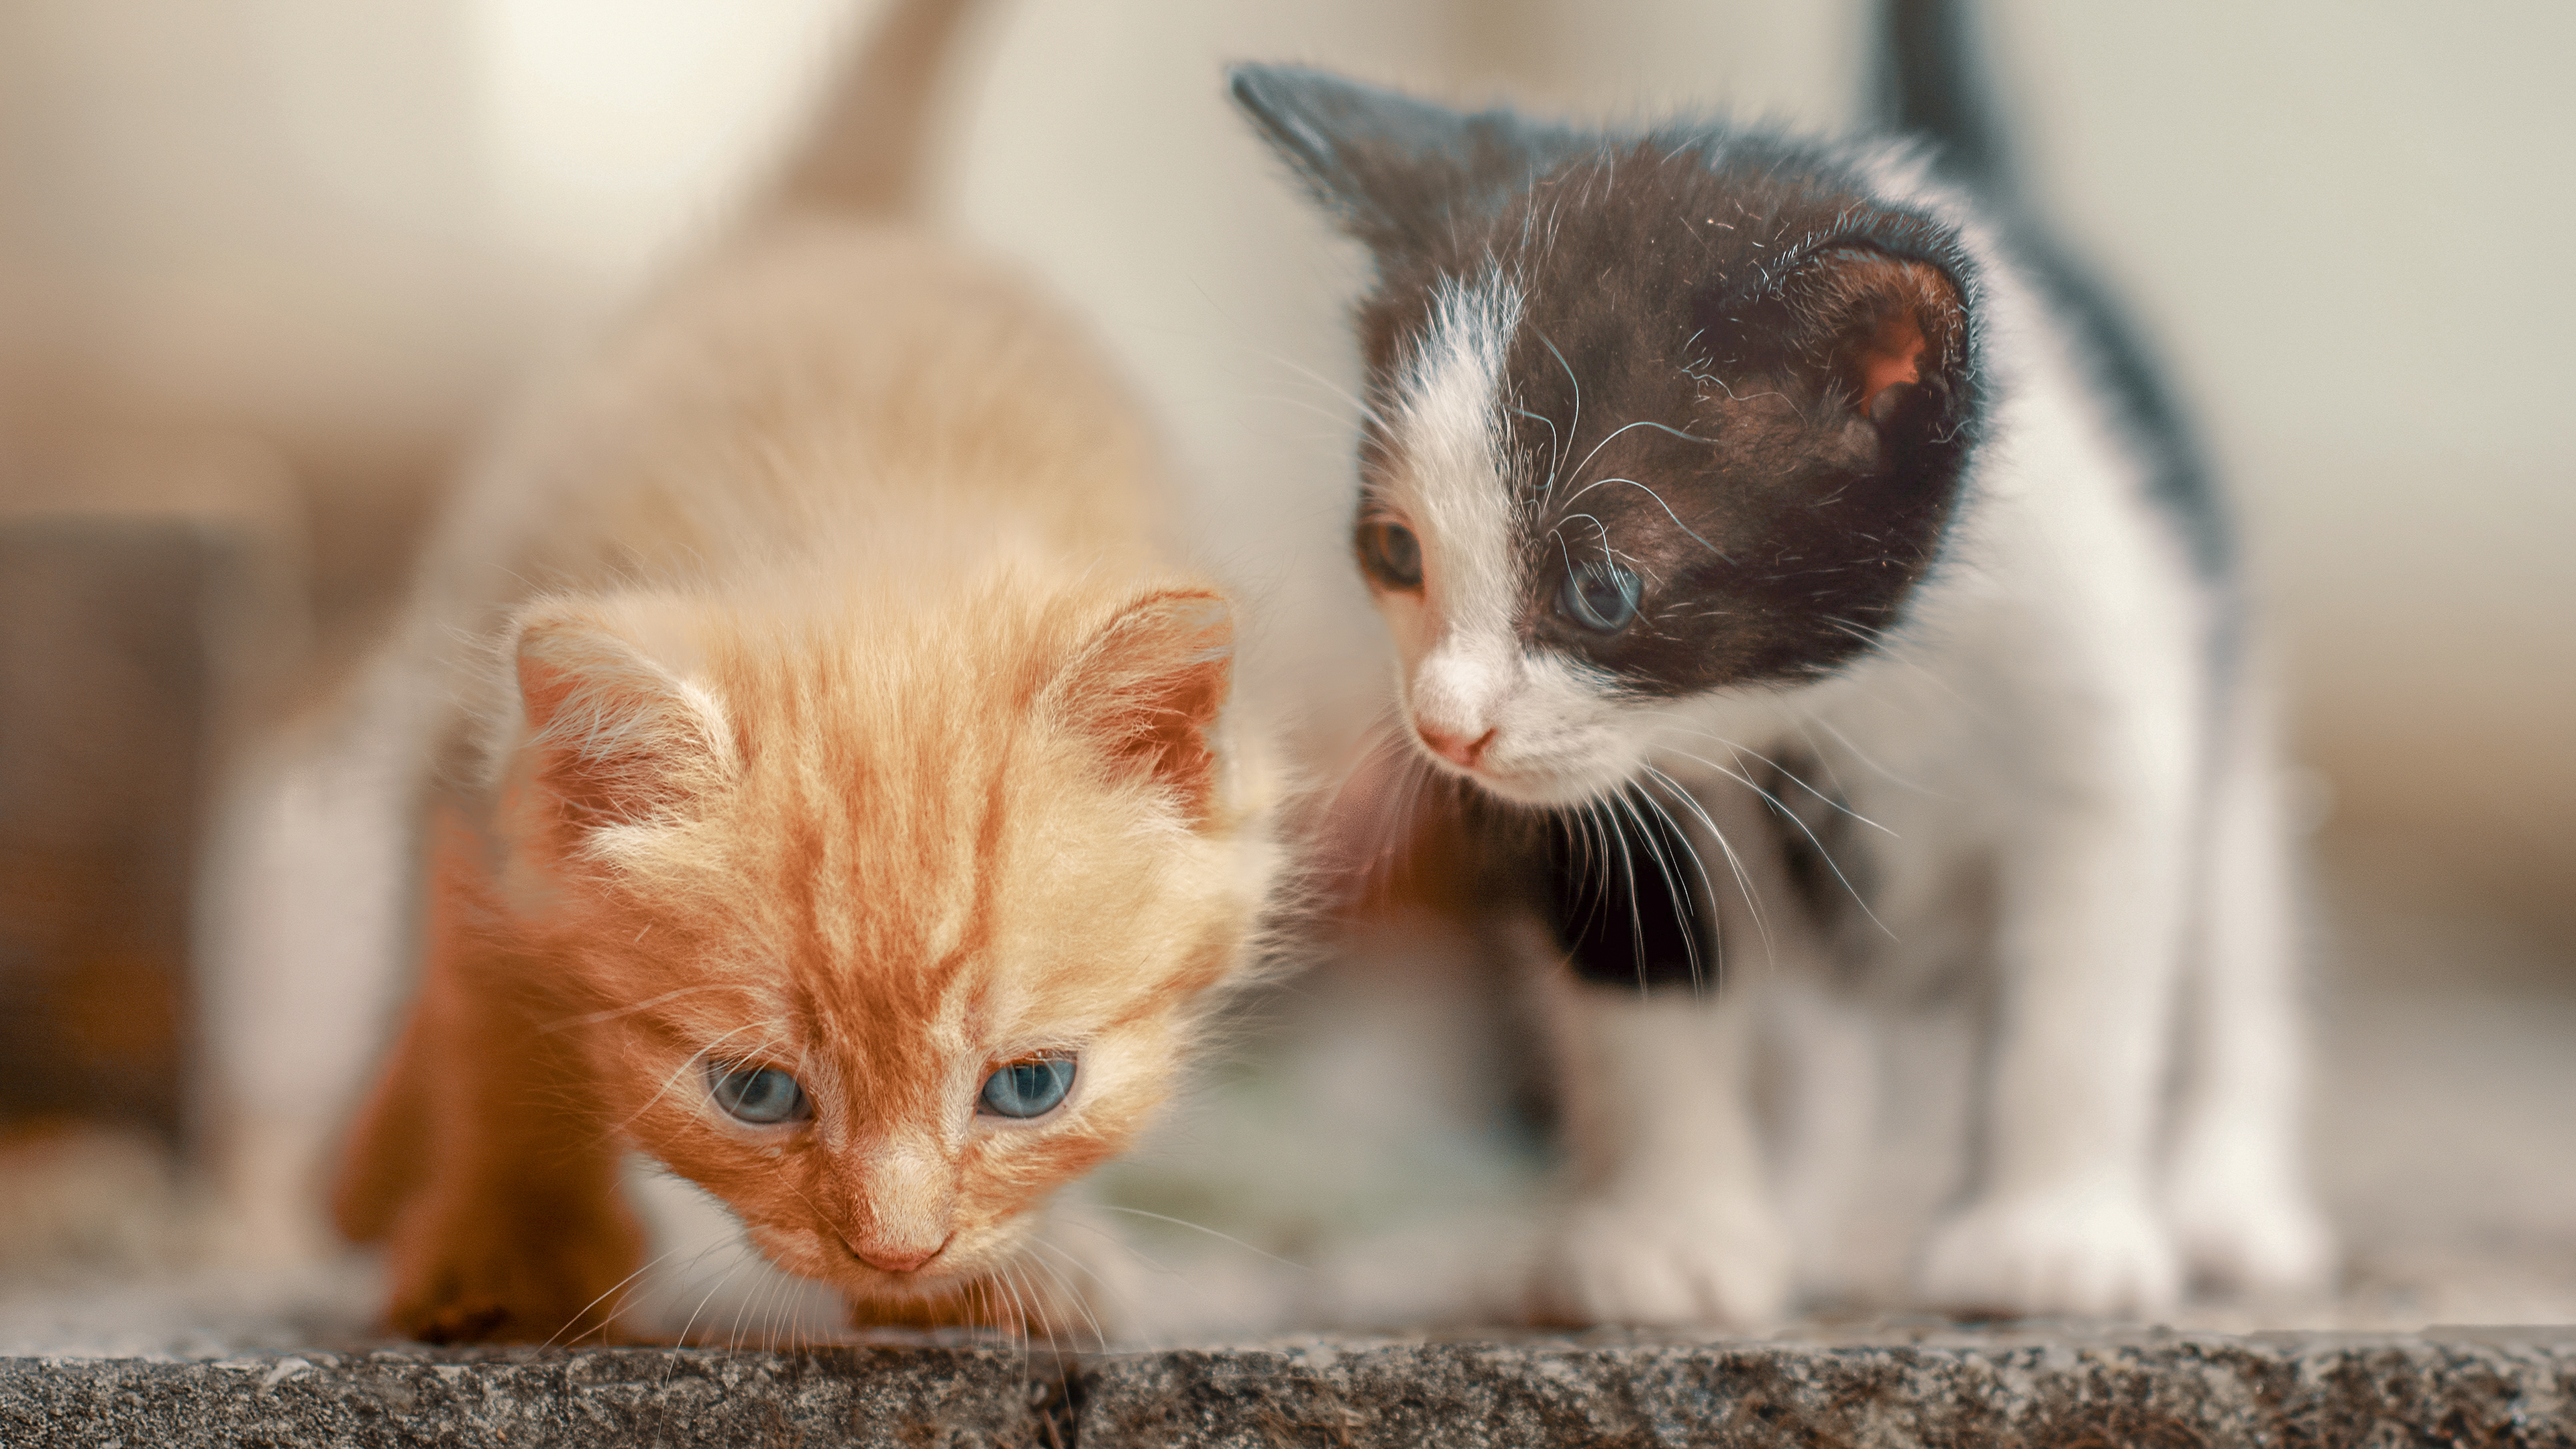 A ginger and a black and white kitten standing on a step outdoors